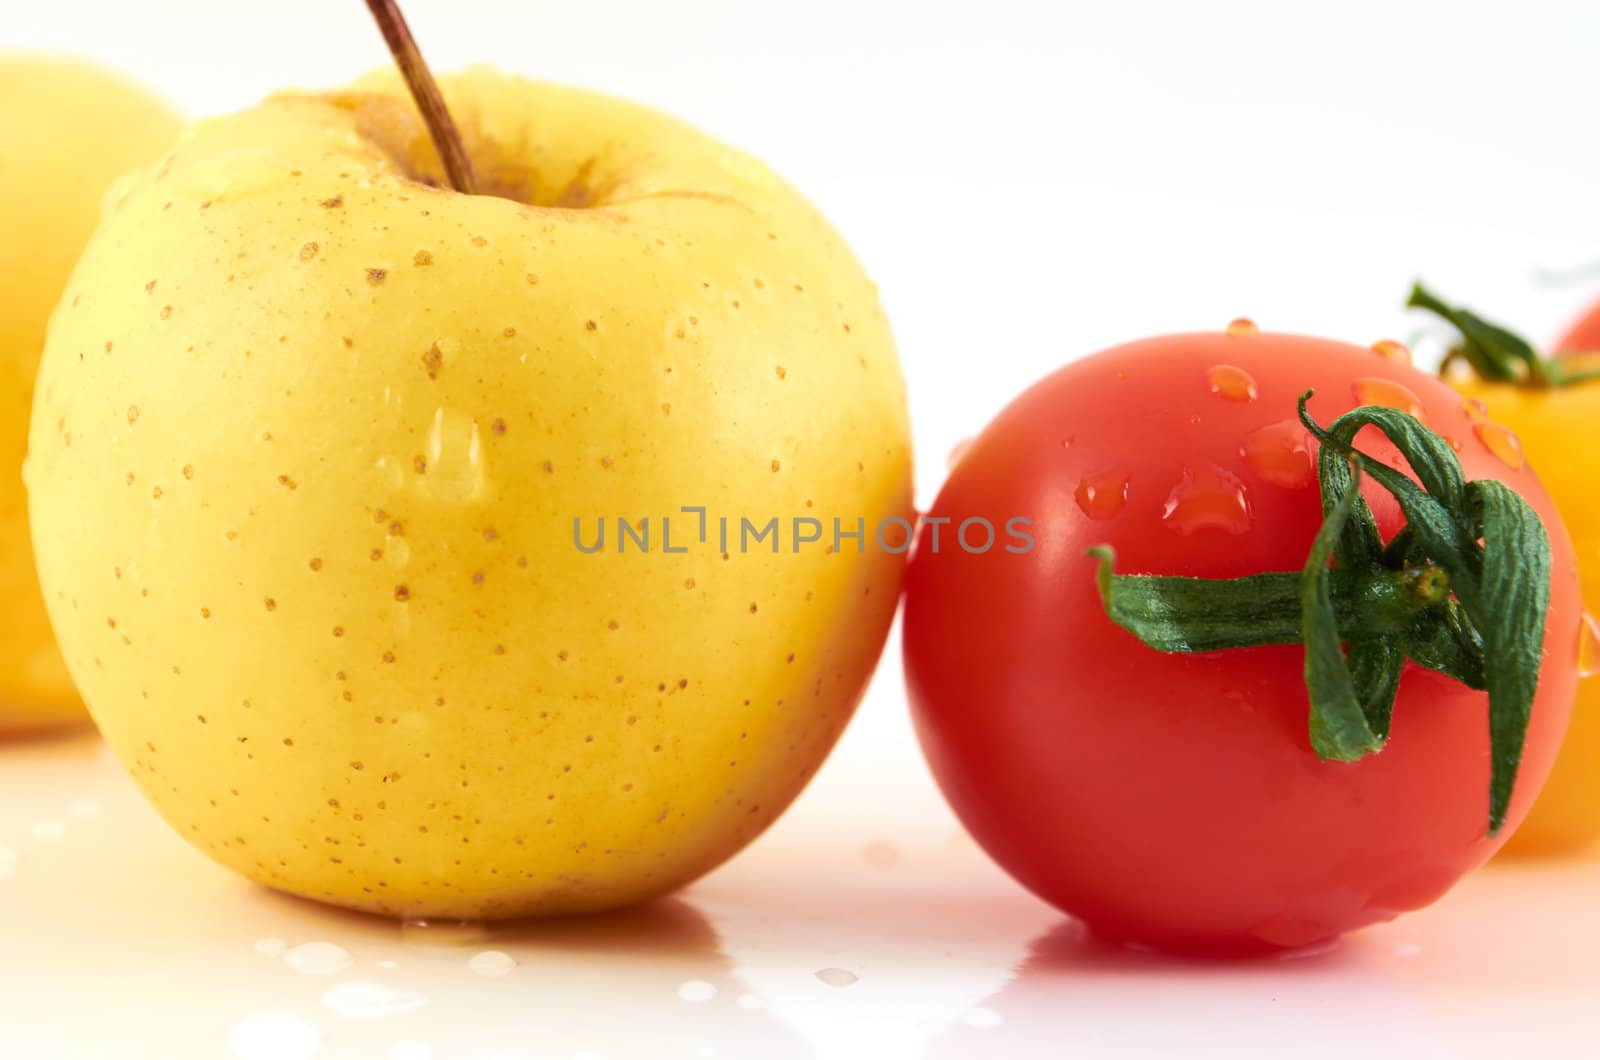 Juicy apples and tomato by subos